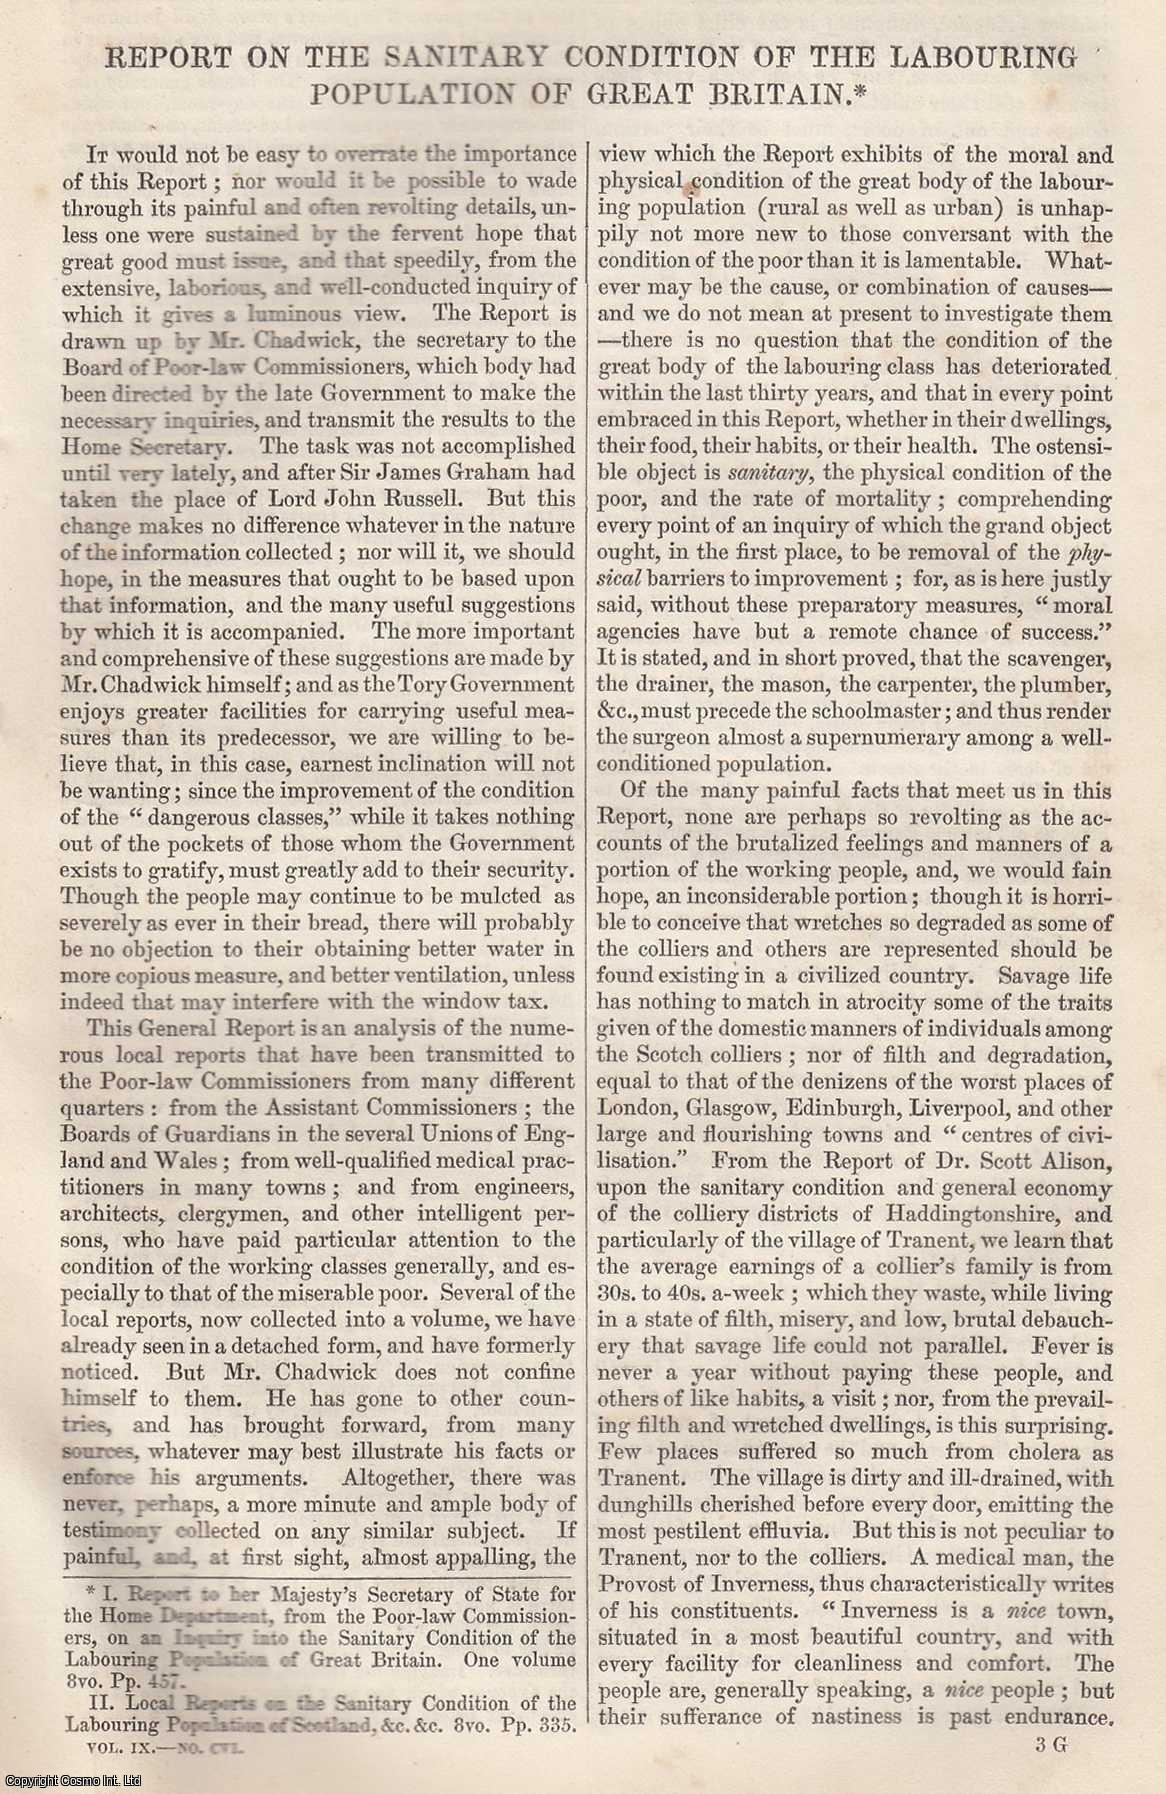 Johnstone, Christian - Report on The Sanitary Condition of The Labouring Population of Great Britain. An original article from Tait's Edinburgh Magazine, 1842.